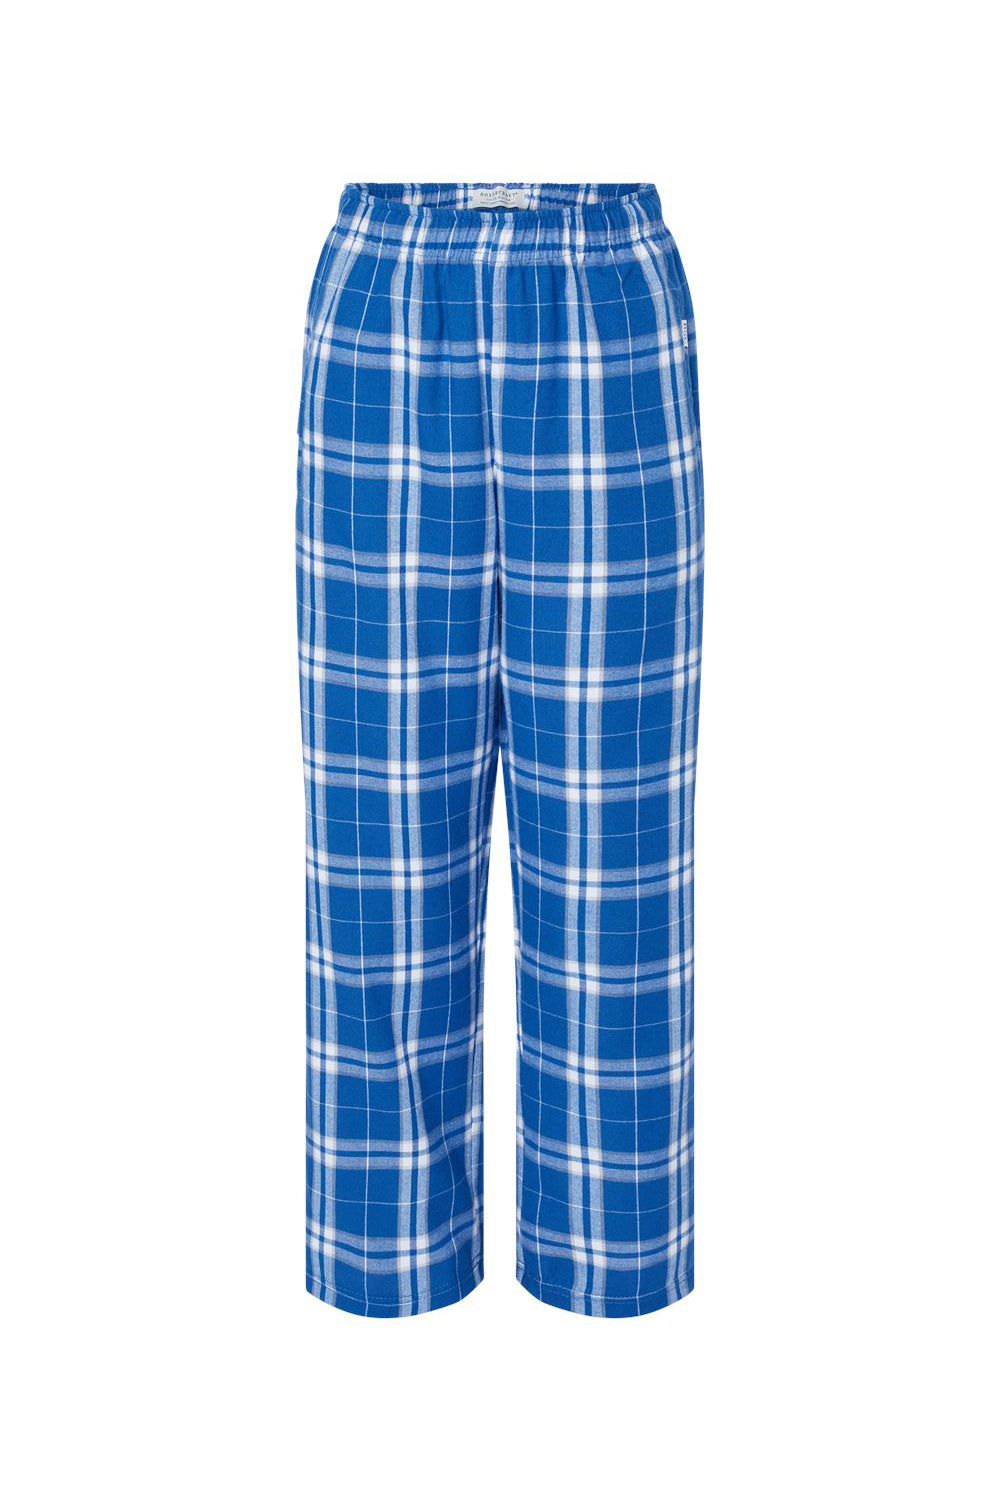 Boxercraft BY6624 Youth Flannel Pants Royal Blue/Silver Grey Flat Front